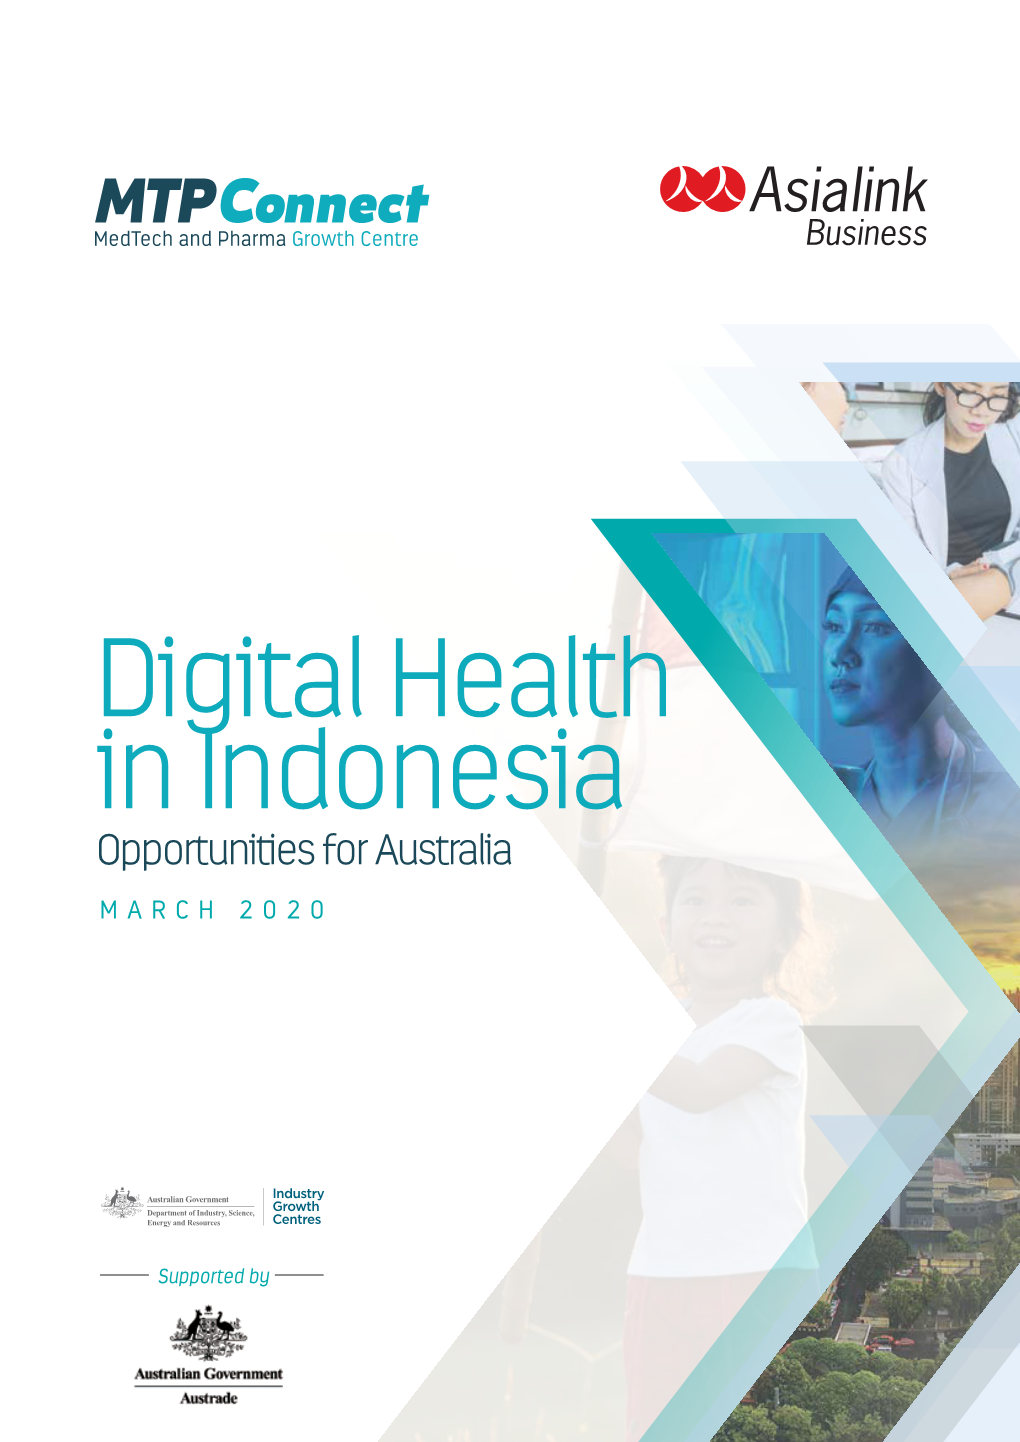 Digital Health in Indonesia Opportunities for Australia MARCH 2020